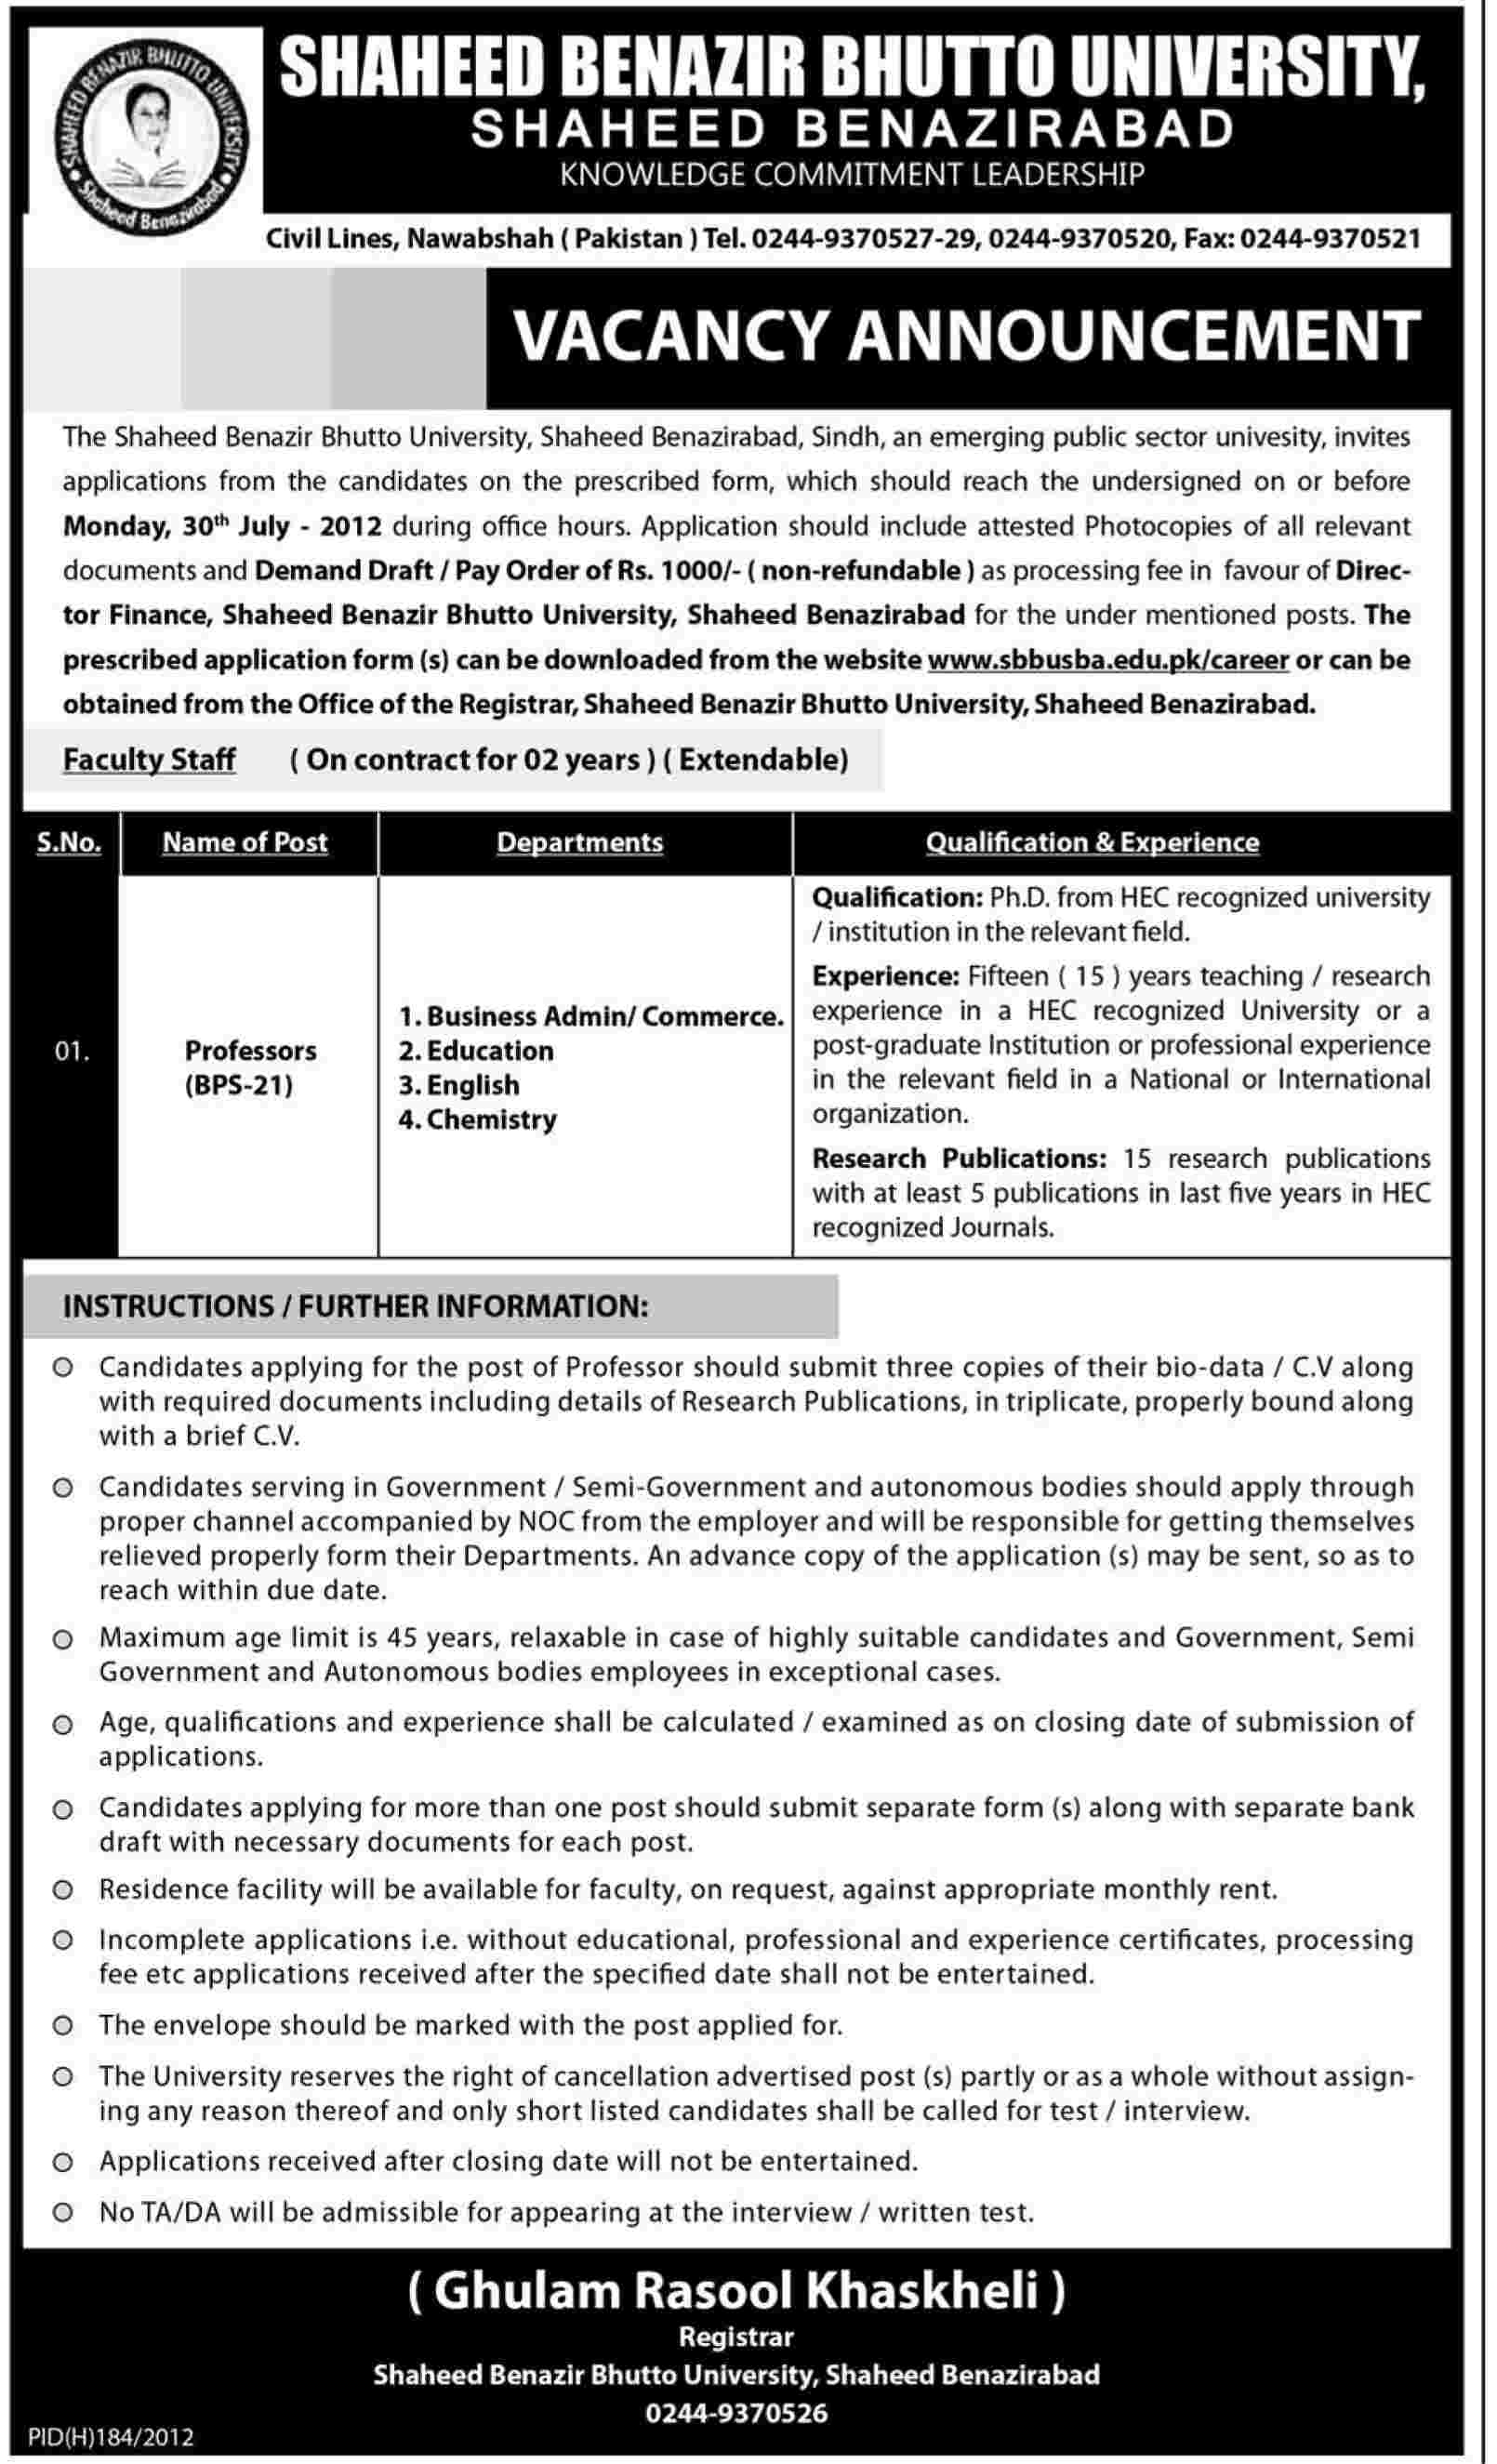 Shaheed Benazir Bhutto University Requires Teaching Faculty (Government Job)